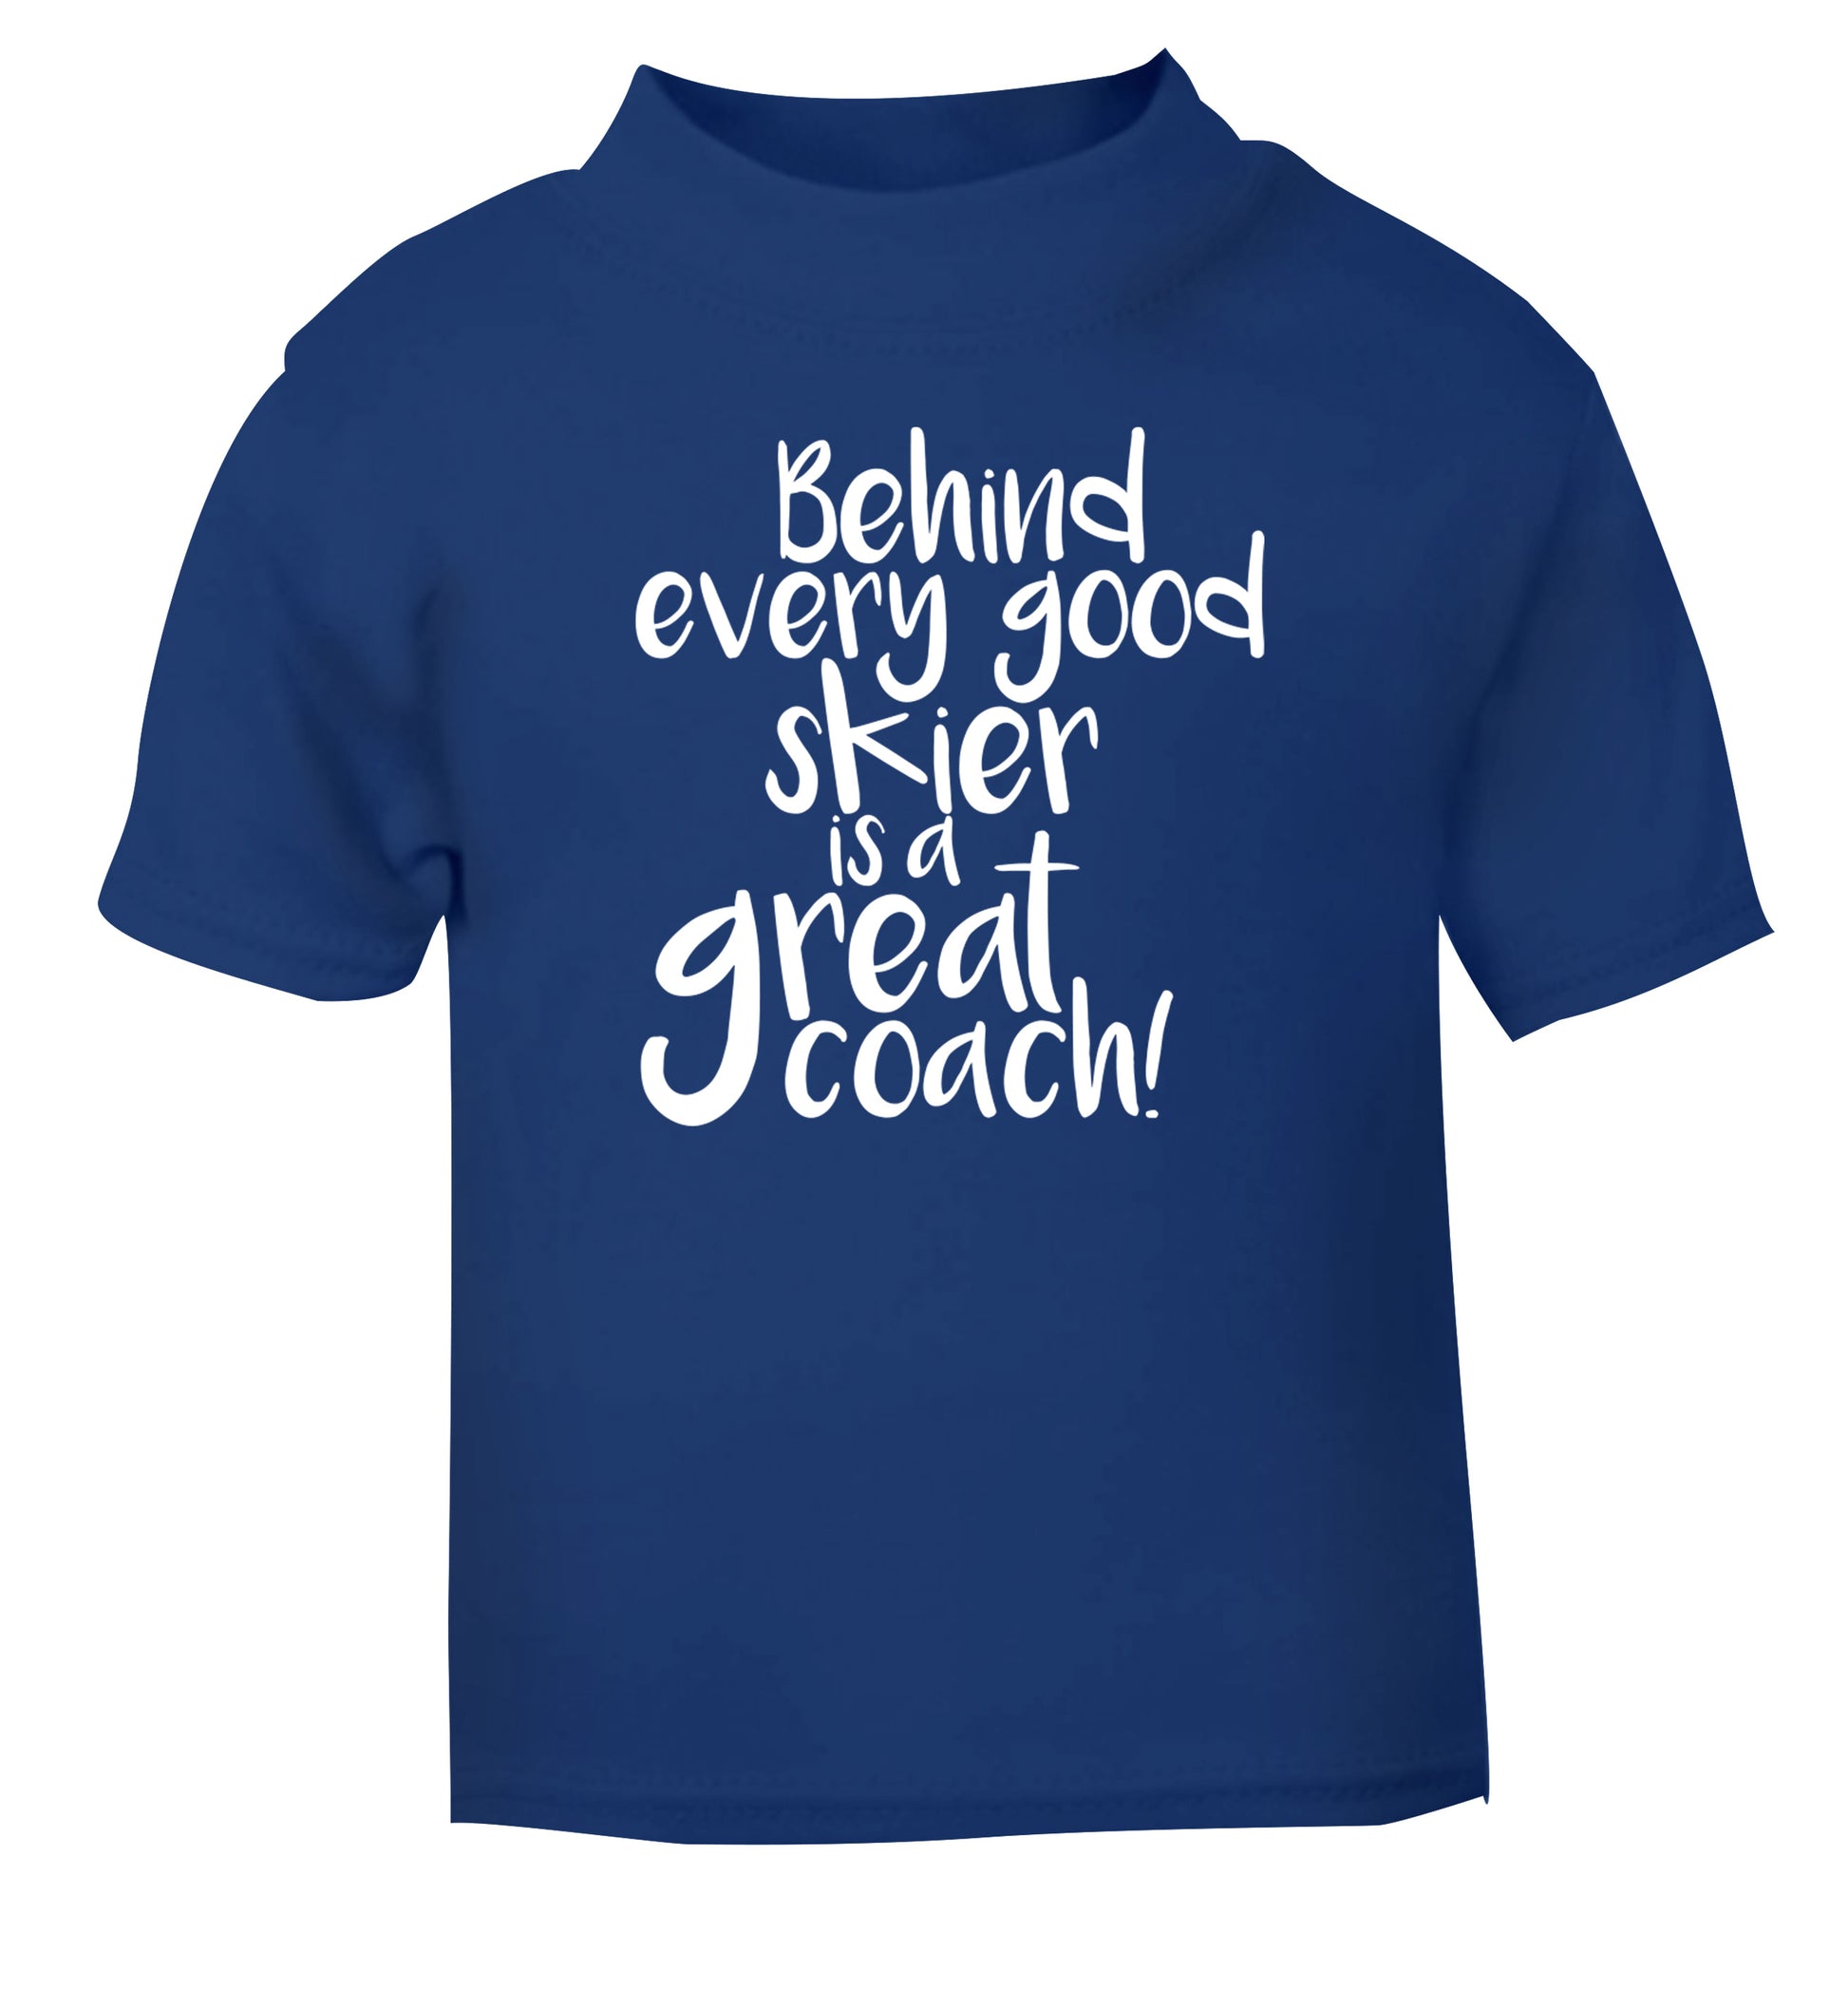 Behind every good skier is a great coach! blue Baby Toddler Tshirt 2 Years